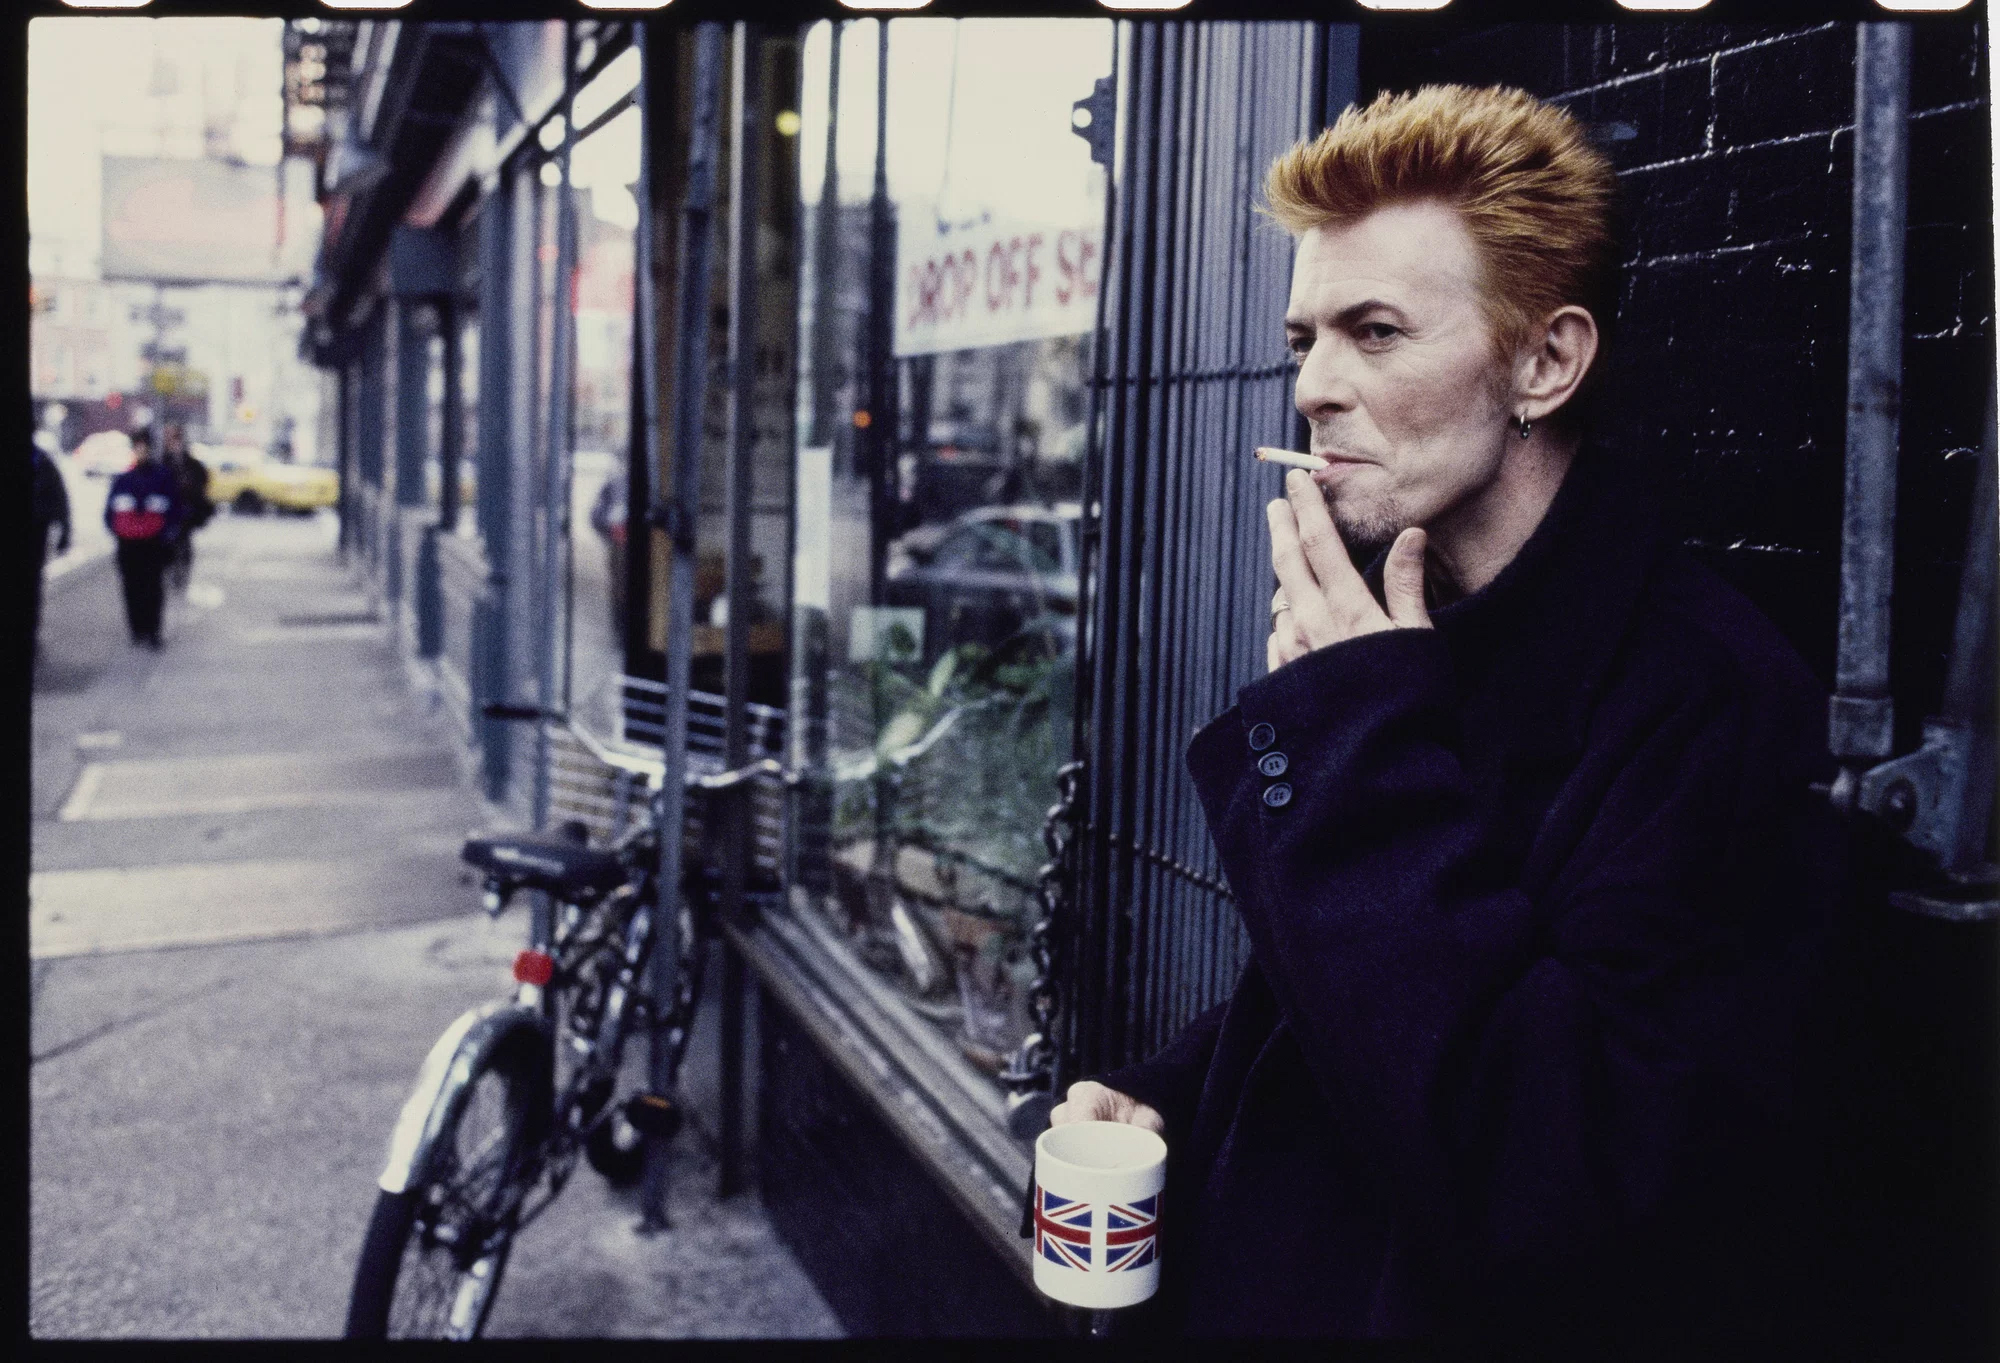 Kevin Cummins, David Bowie in front of Tea & Sympathy in New York City, 10 January 1997